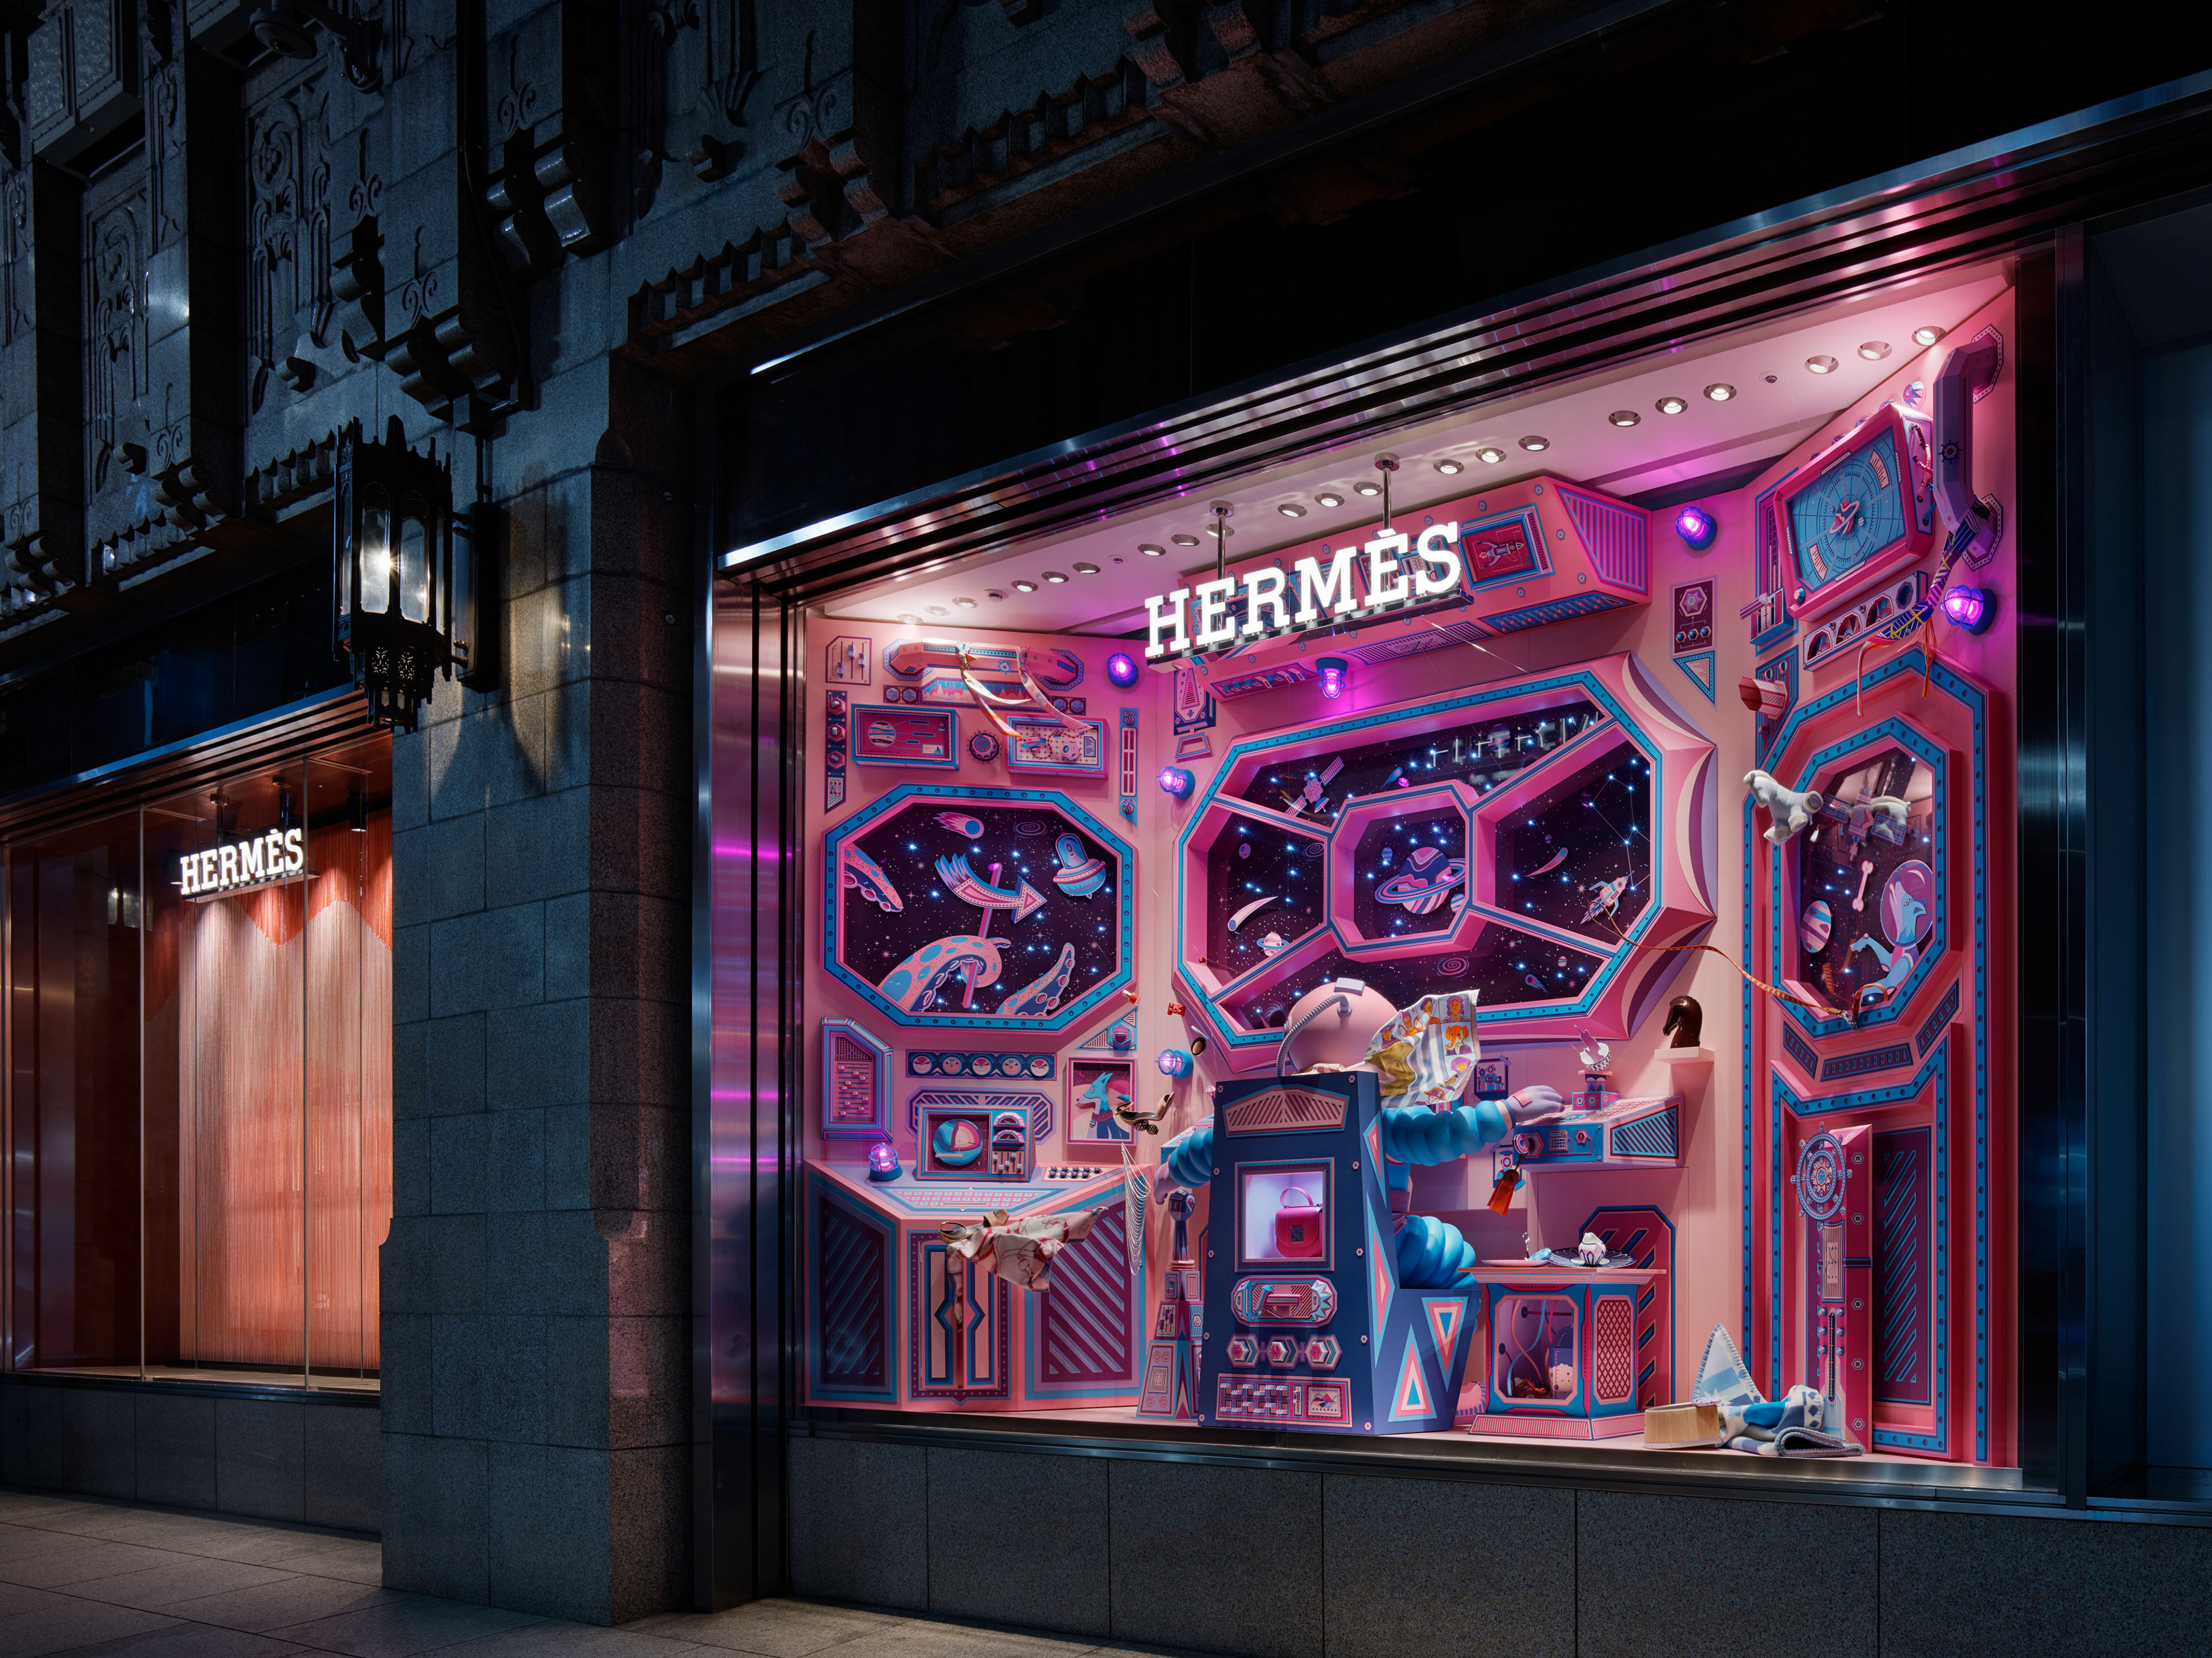 zim & zou fills Hermès' cabinet of curiosities with leather creatures